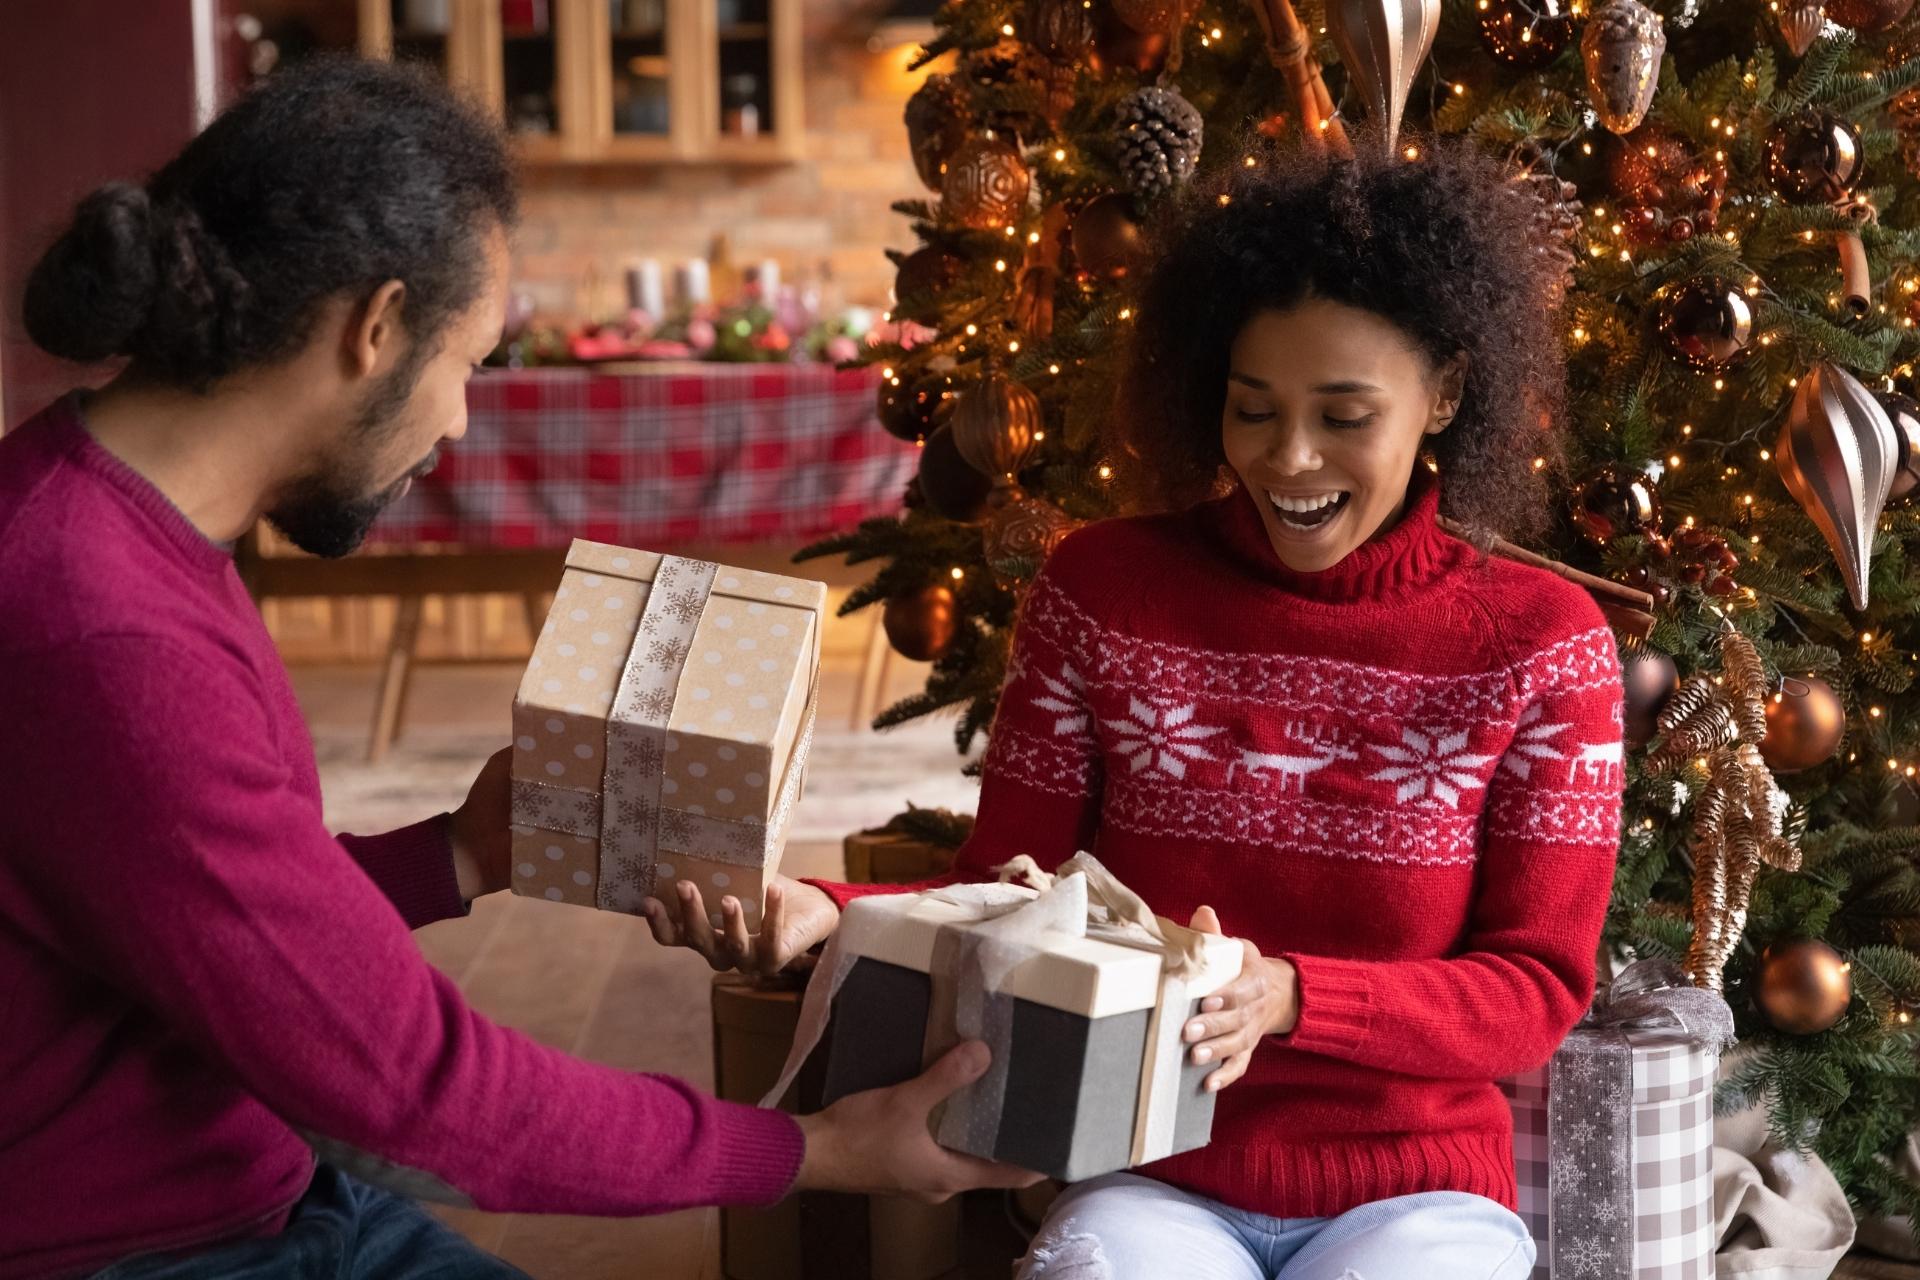 Leaf411’s 2021 Holiday Gift Guide: PHoto of a couple opening holiday gifts by a Christmas tree